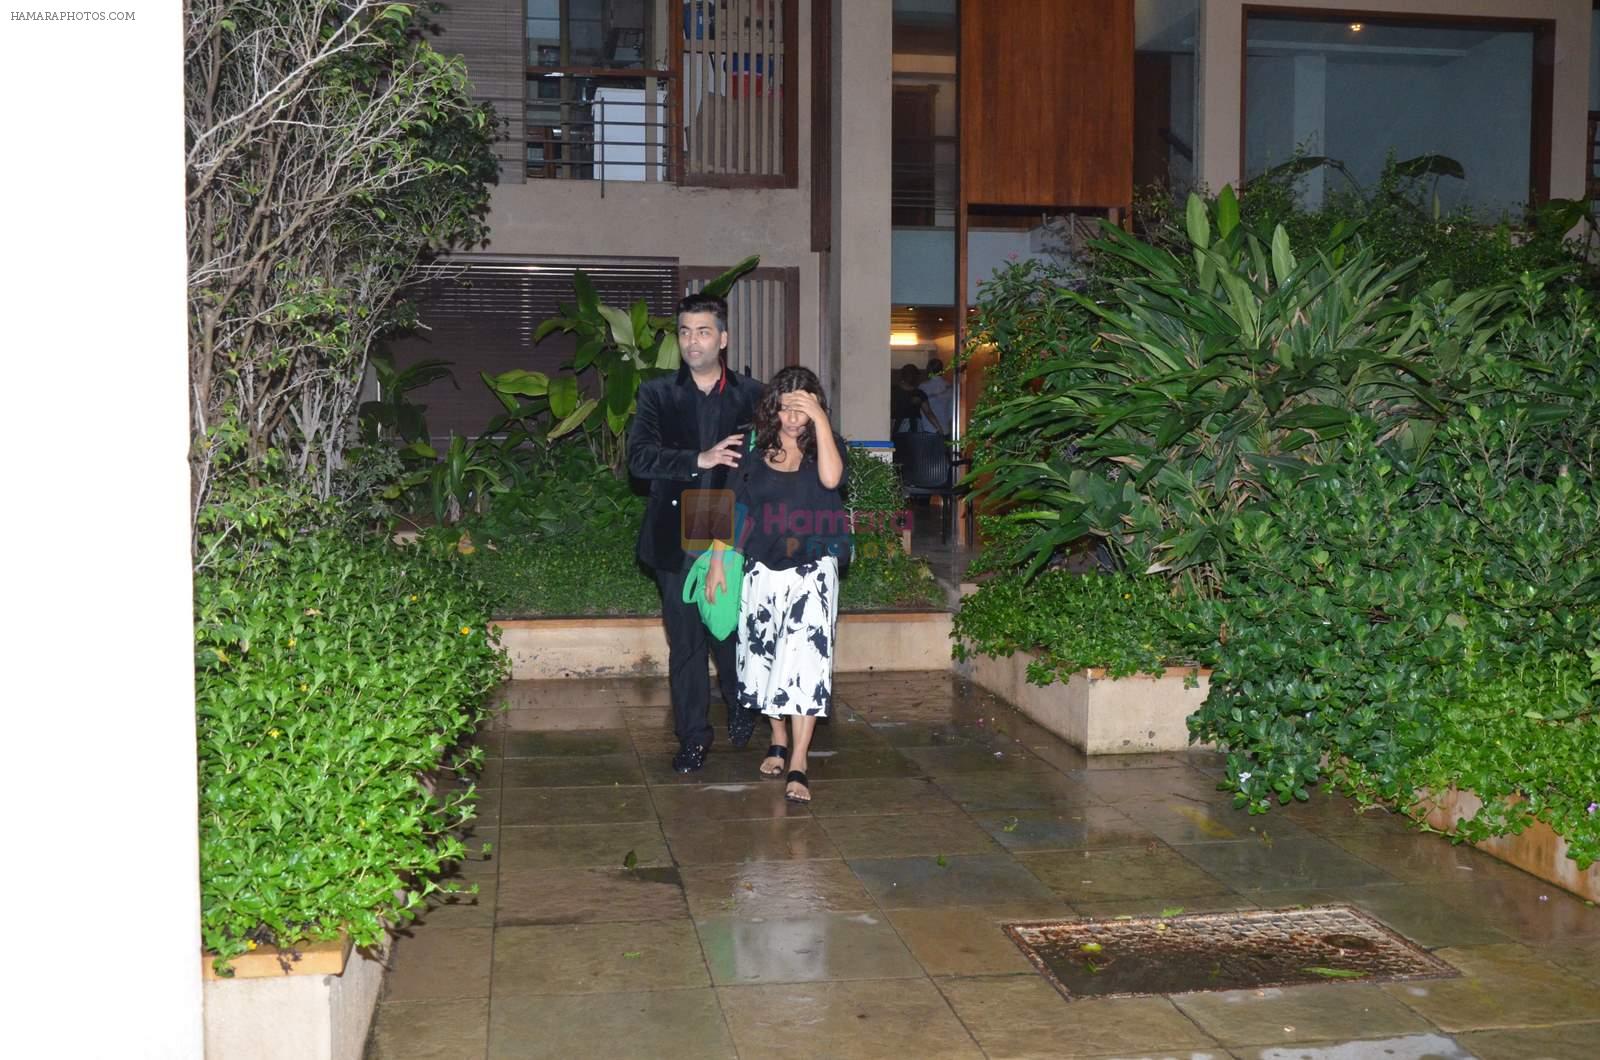 Karan Johar Zoya Akhtar At Shahid Kapoor Invites All Leading Directors To His House In Juhu Mumbai On 23rd July 2015 Karan Johar Bollywood Photos Hello guys please don't forget to like our videos and subscribe to our channel for more updates 😁. hamara photos